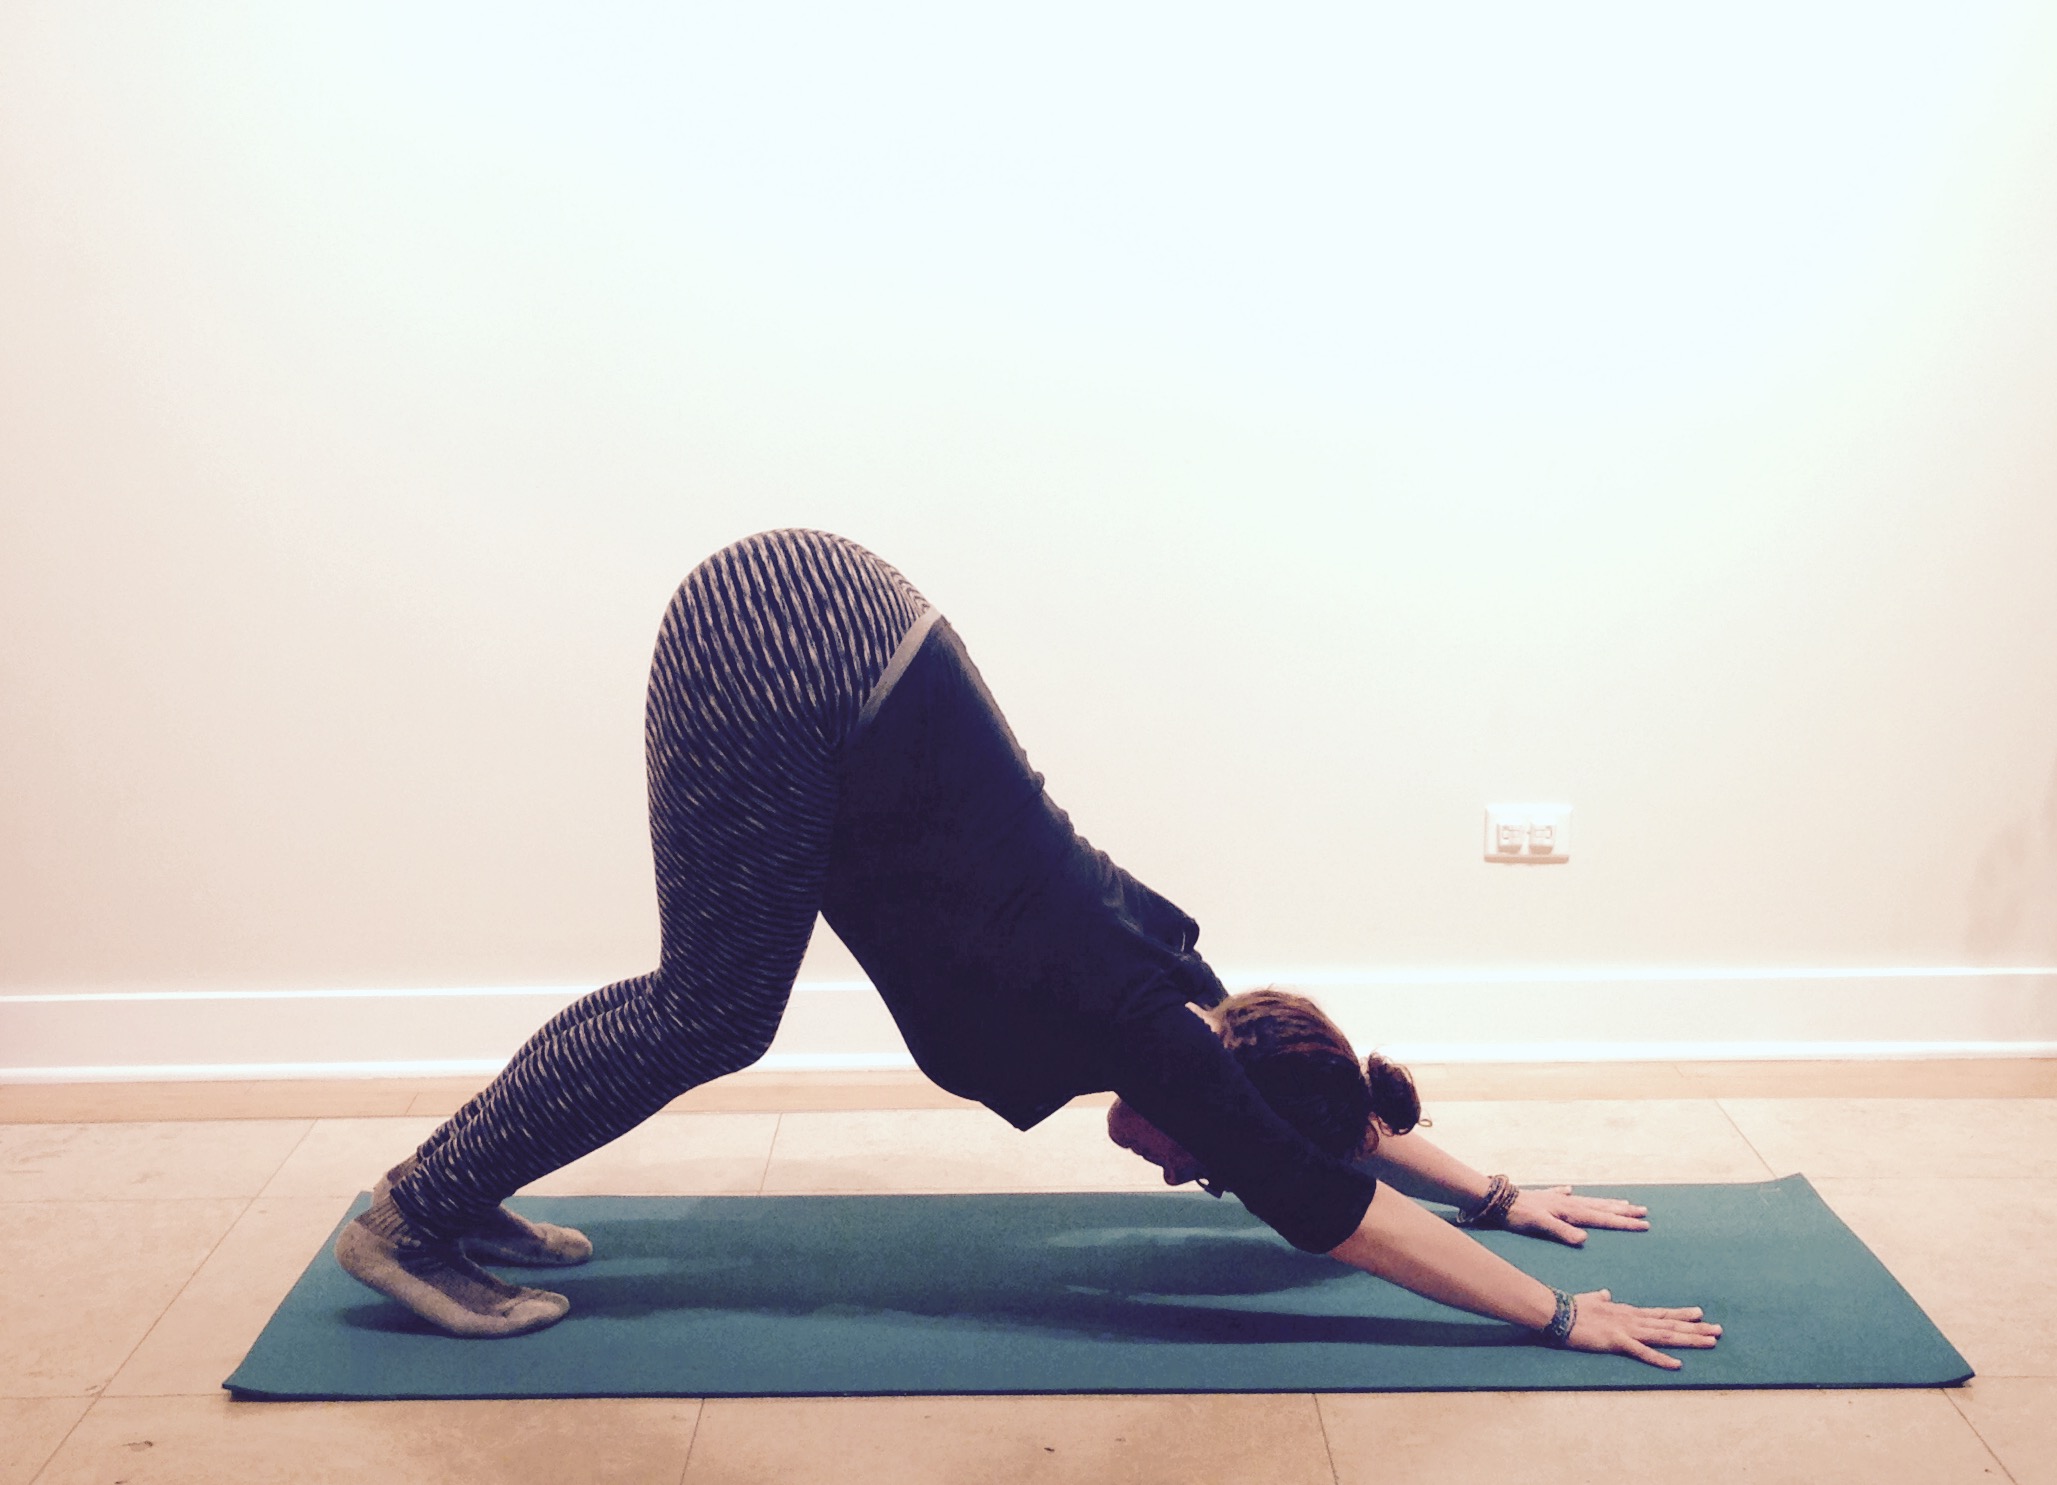 What are some lifestyle changes that can complement yoga for sinus relief?  - Quora